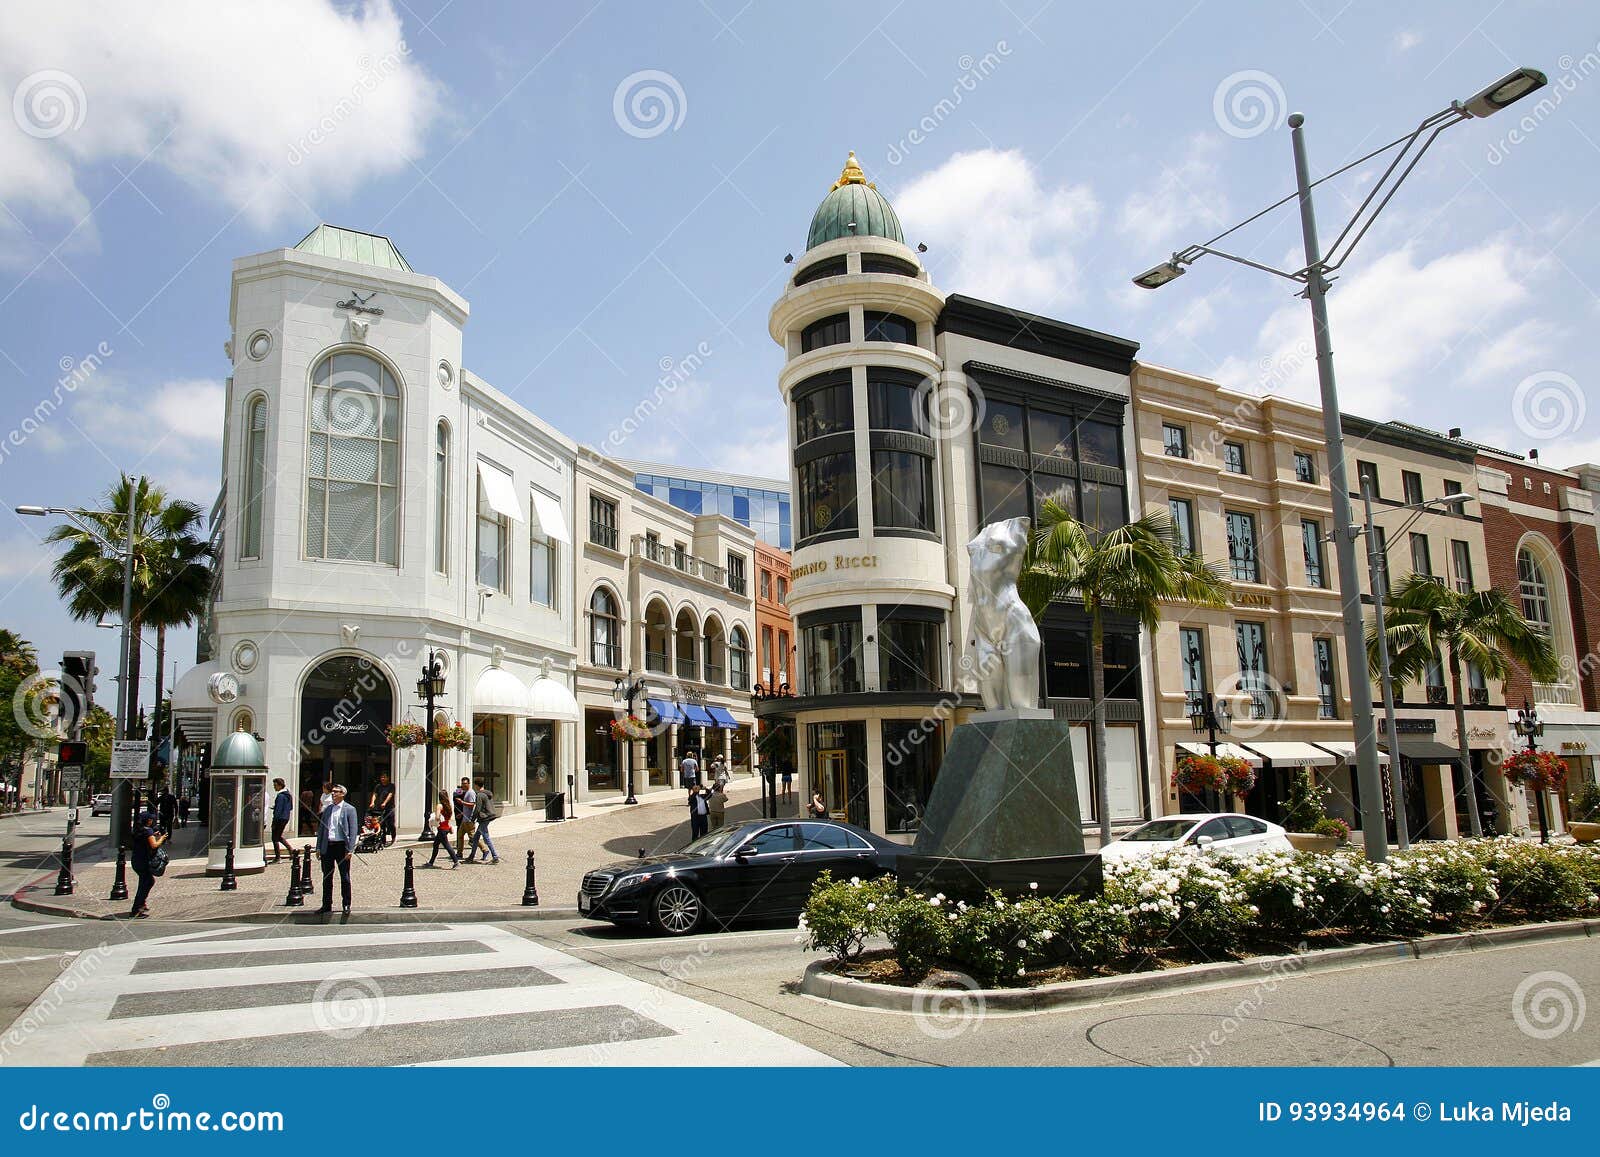 Rodeo Drive Shopping Center in Beverly Hills Editorial Stock Image ...